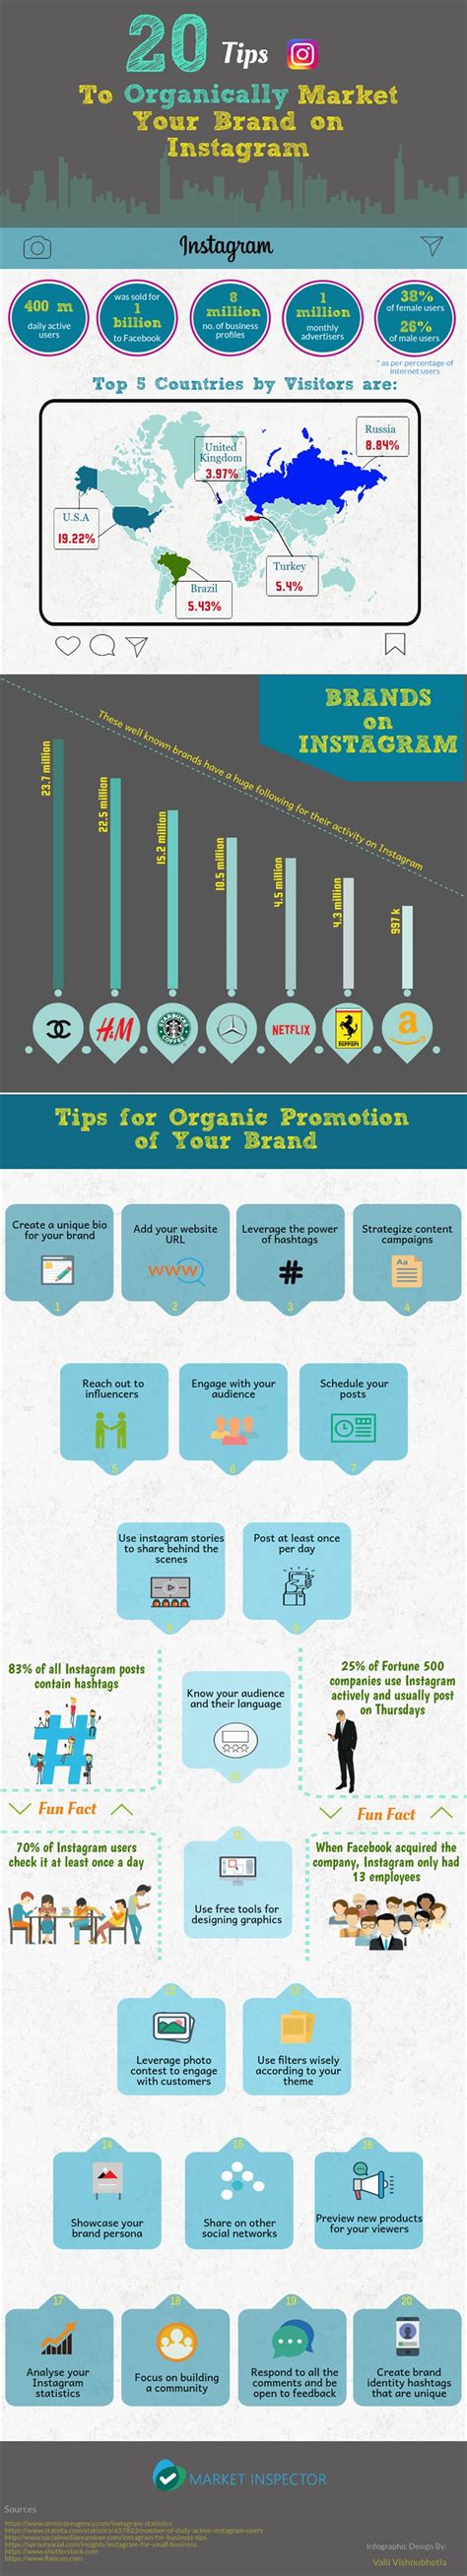 20 Tips To Market Your Business On Instagram Infographic